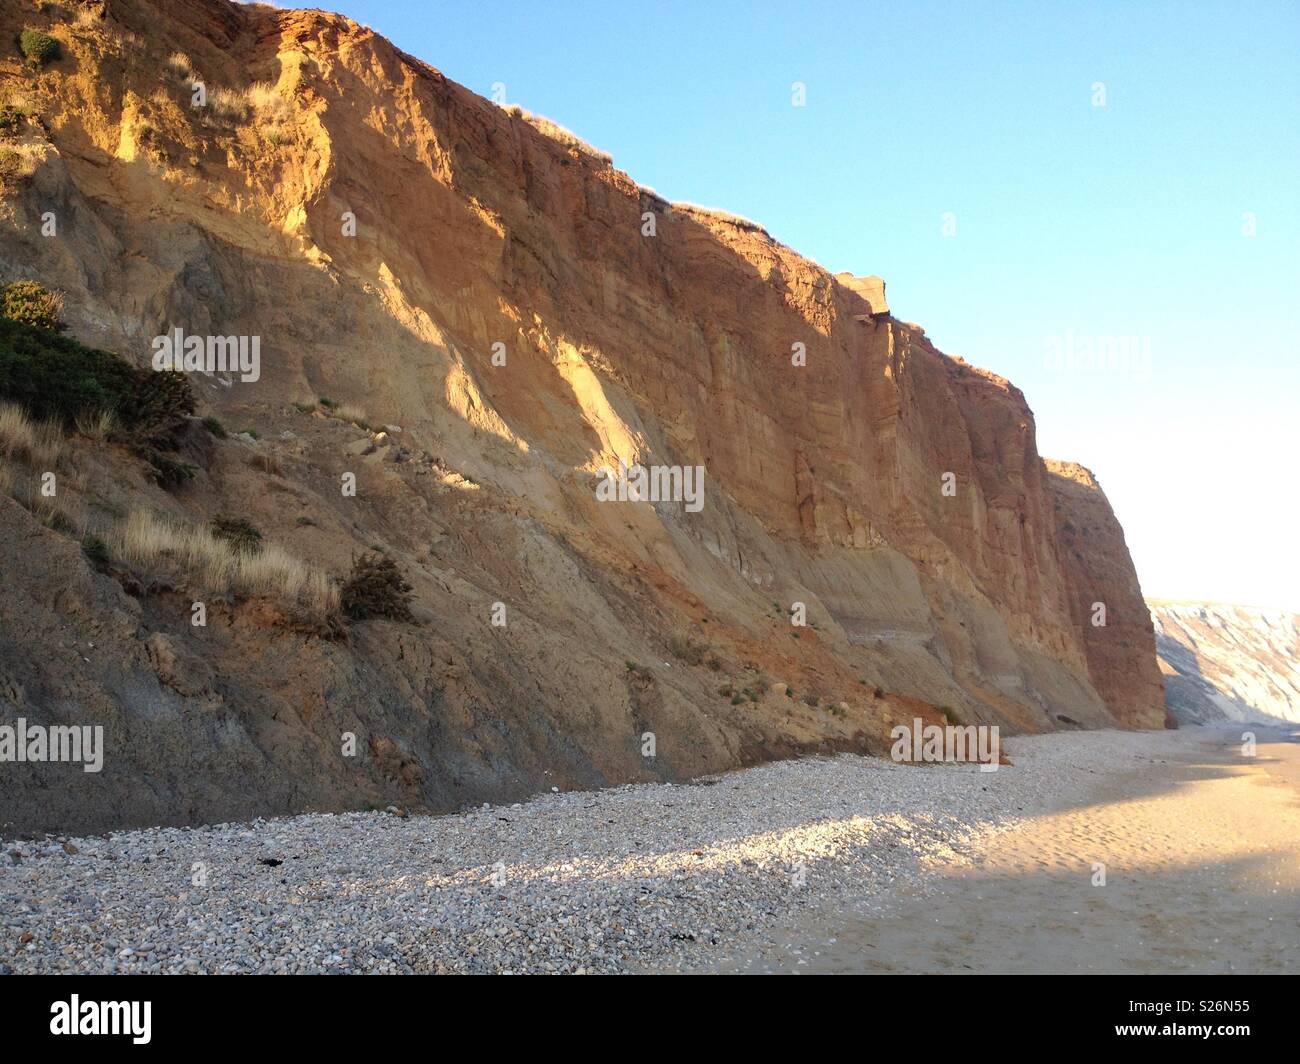 The sandstone cliff face at Yaverland Beach on the Isle of Wight, UK. Stock Photo